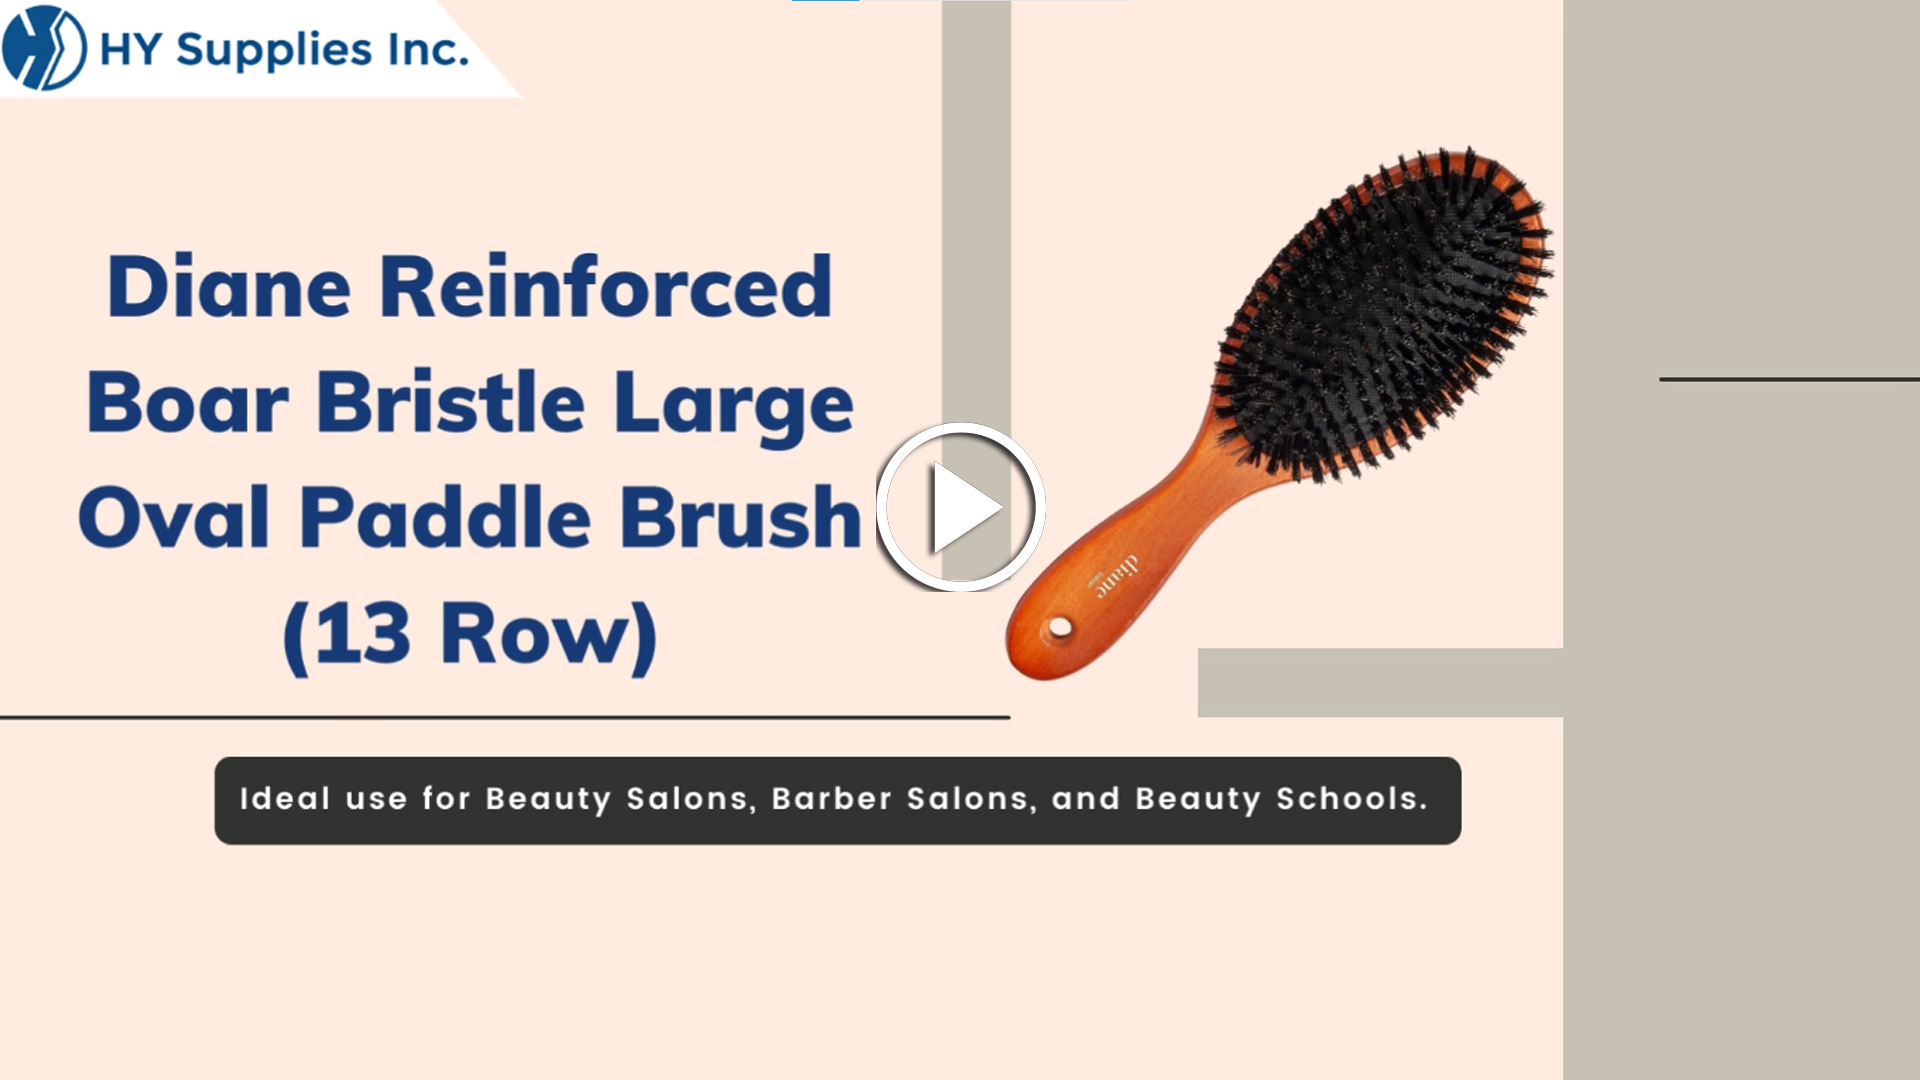 Diane Reinforced Boar Bristle Large Oval Paddle Brush (13 Row)